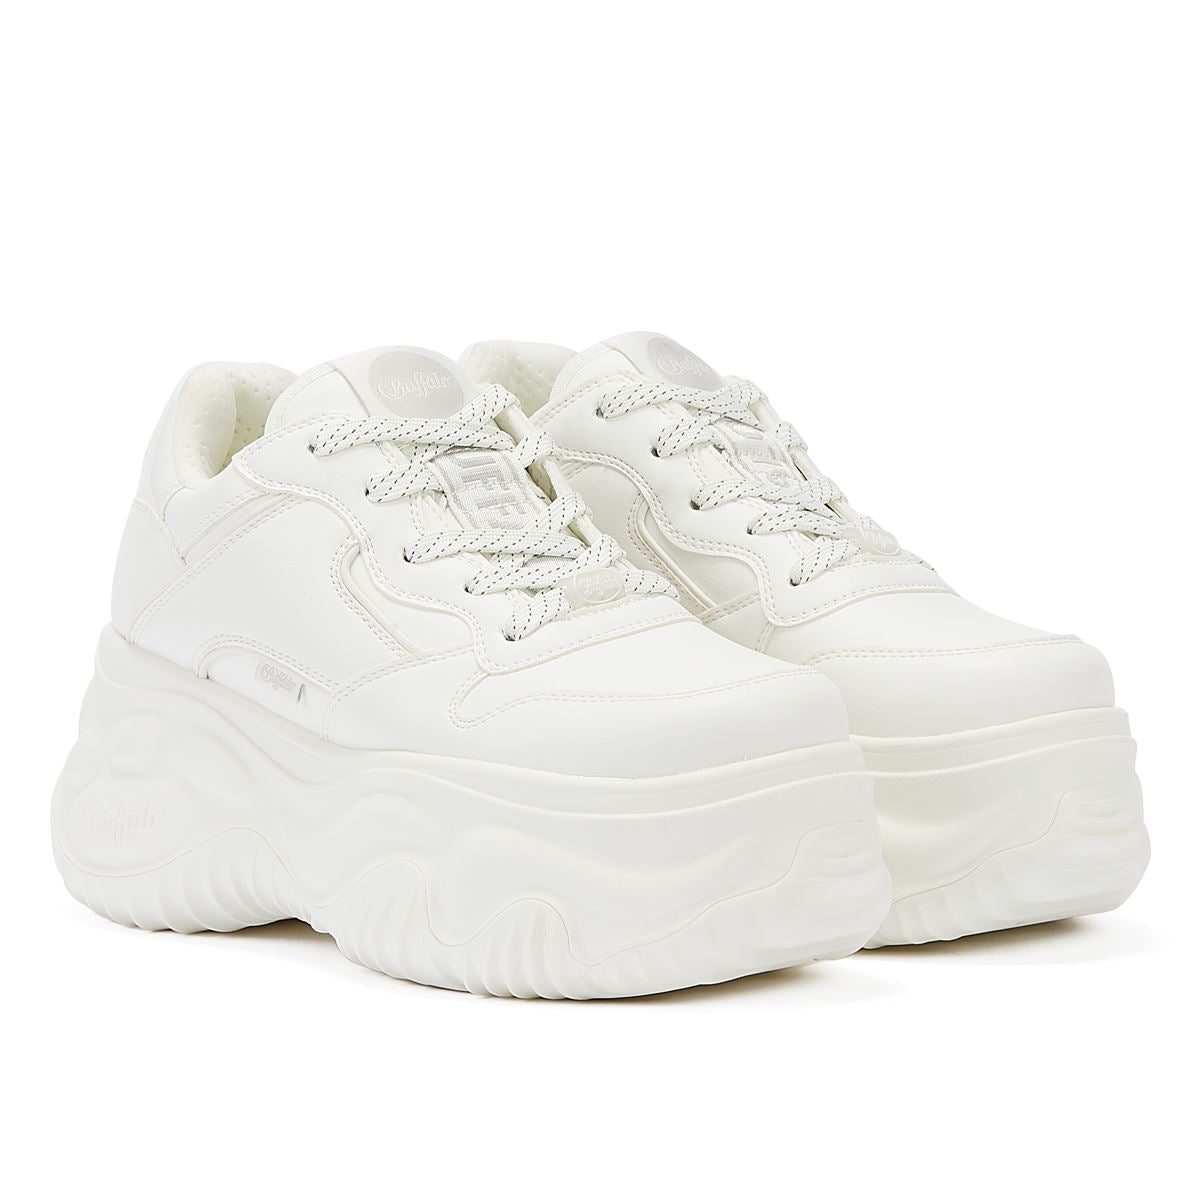 Buffalo Blader One Women’s White Trainers